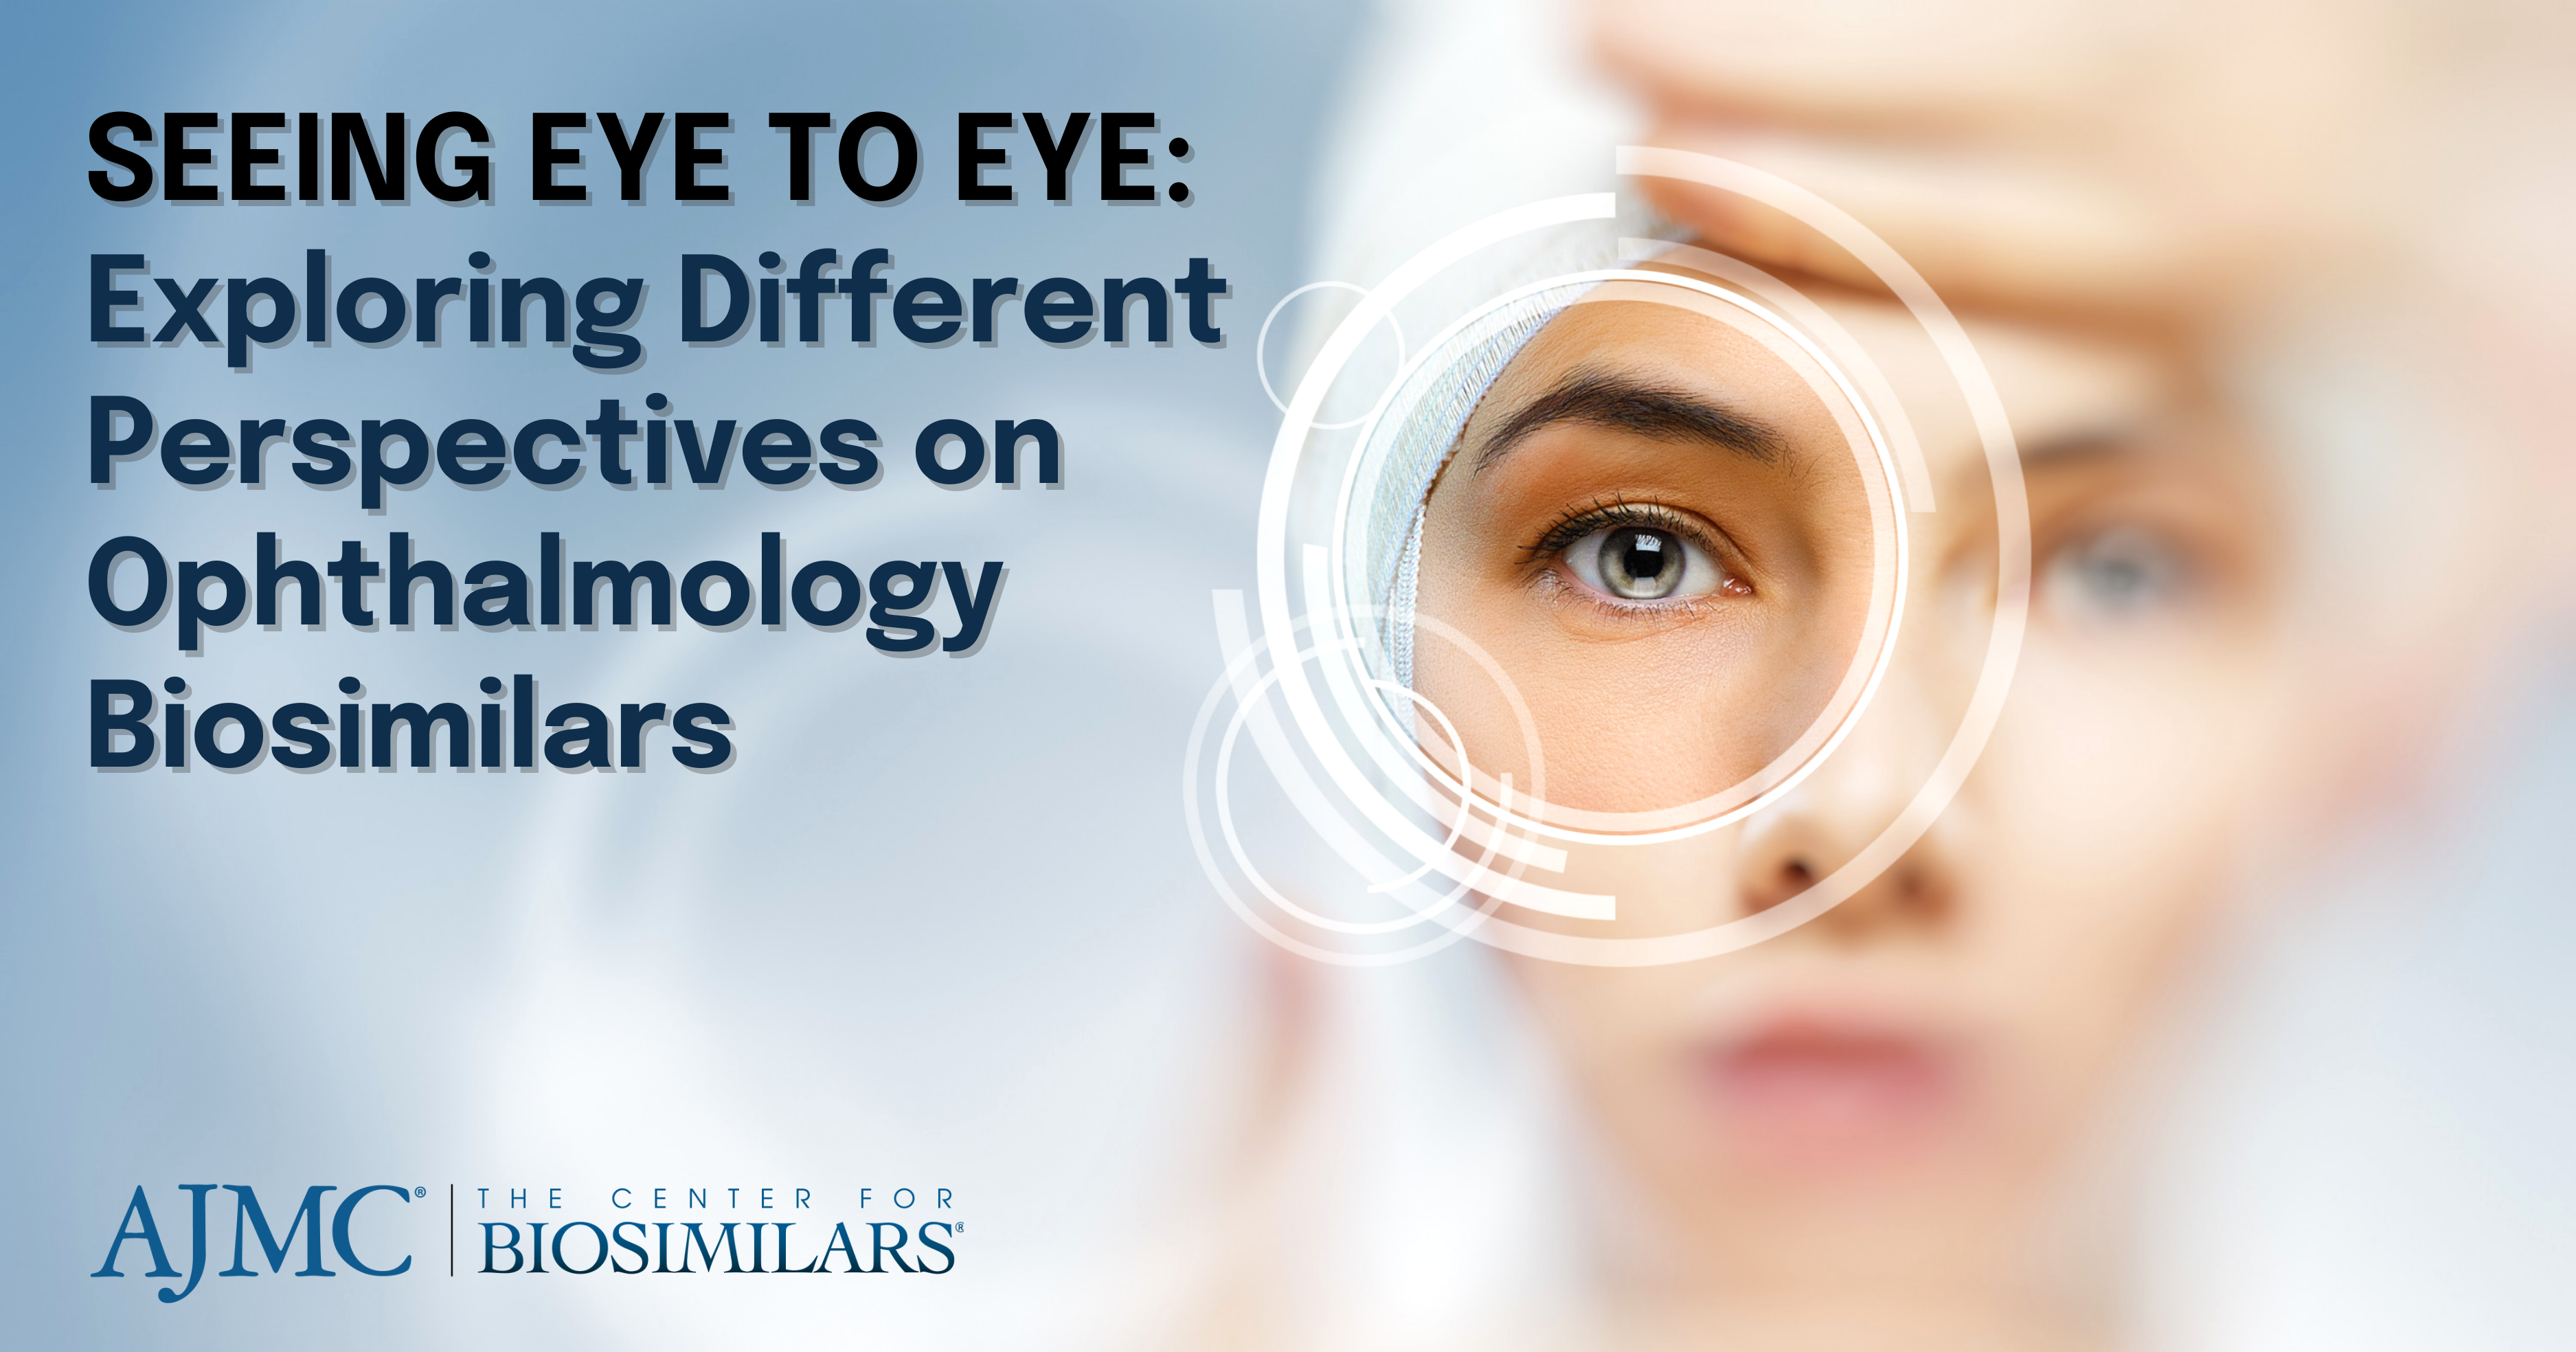 "SEEING EYE TO EYE:  Exploring Different Perspectives on Ophthalmology Biosimilars SEEING EYE TO EYE:  Exploring Different Perspectives on Ophthalmology Biosimilars" with the CfB logo and an image of an eye